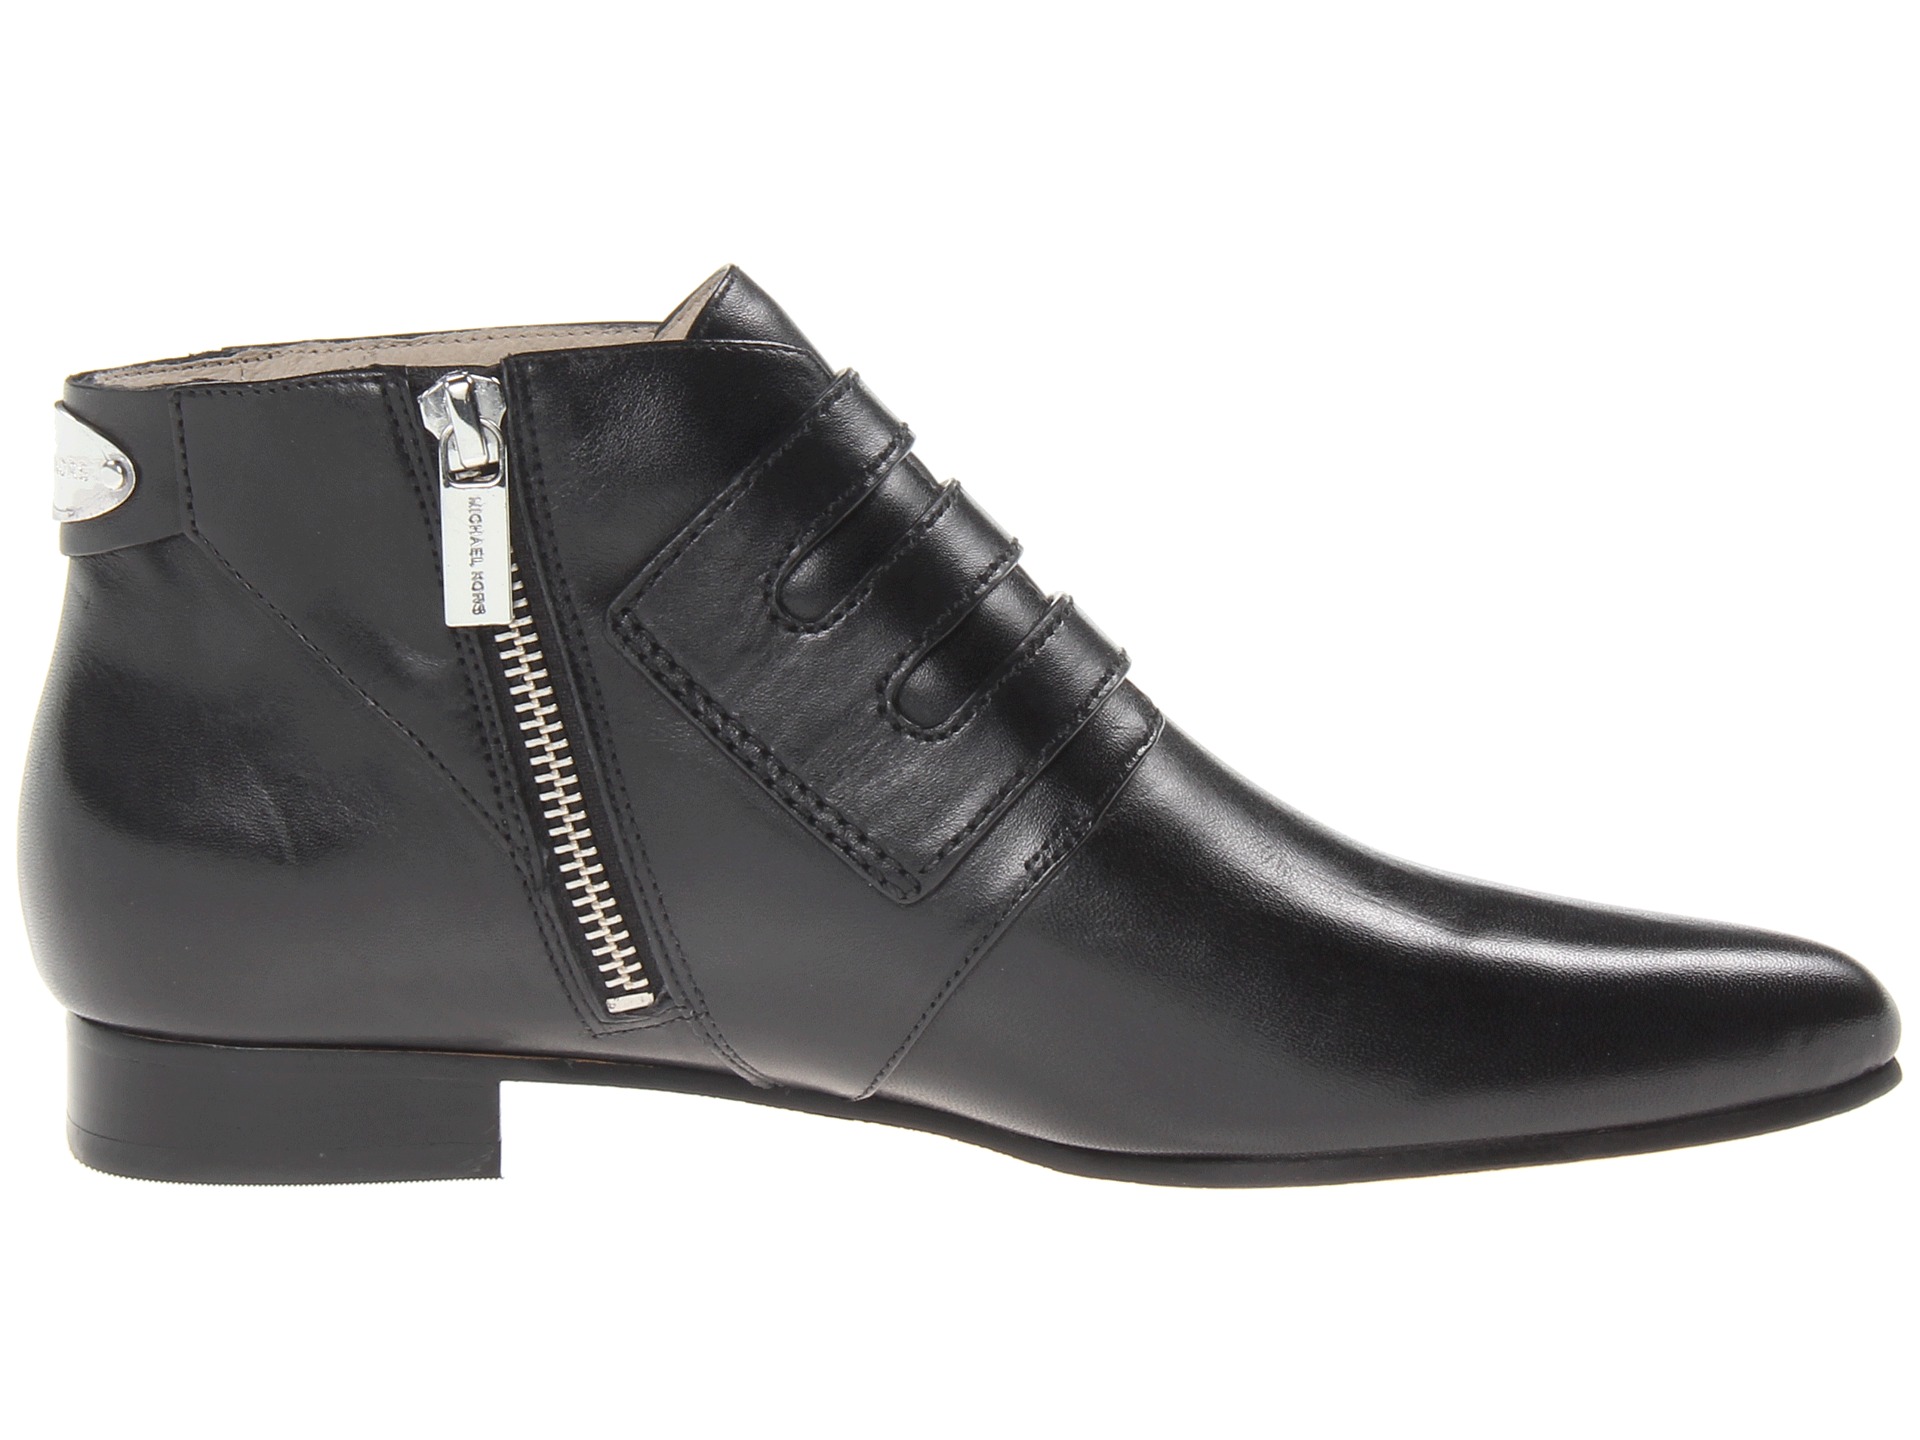 Michael Michael Kors Roswell Ankle Boot | Shipped Free at Zappos